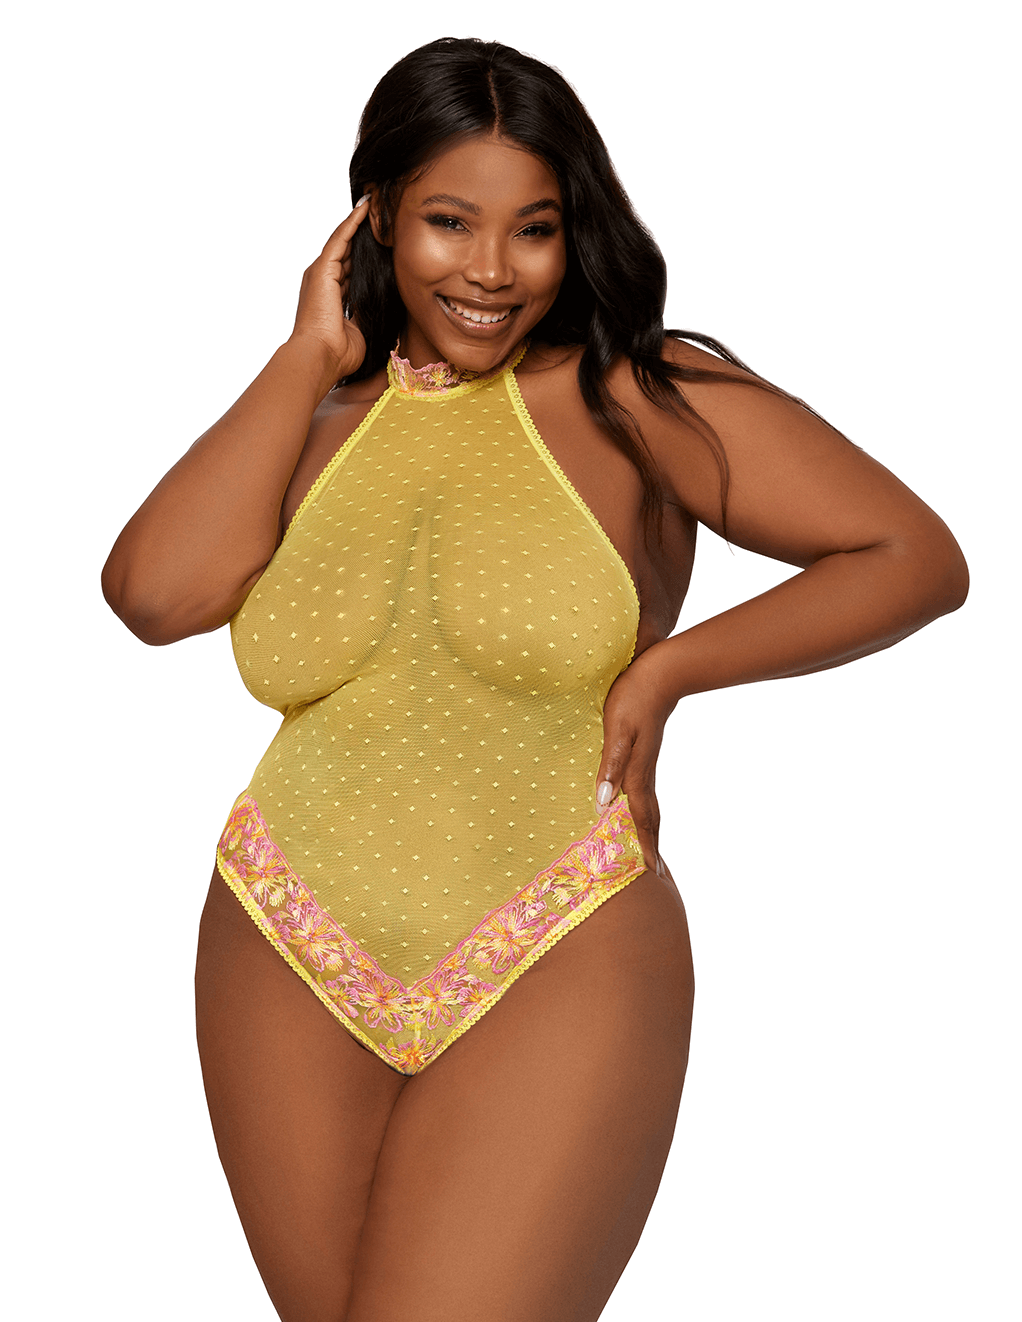 Dreamgirl Embroidered Dot Mesh Teddy & Cincher - Citrus - Teddy Front Plus